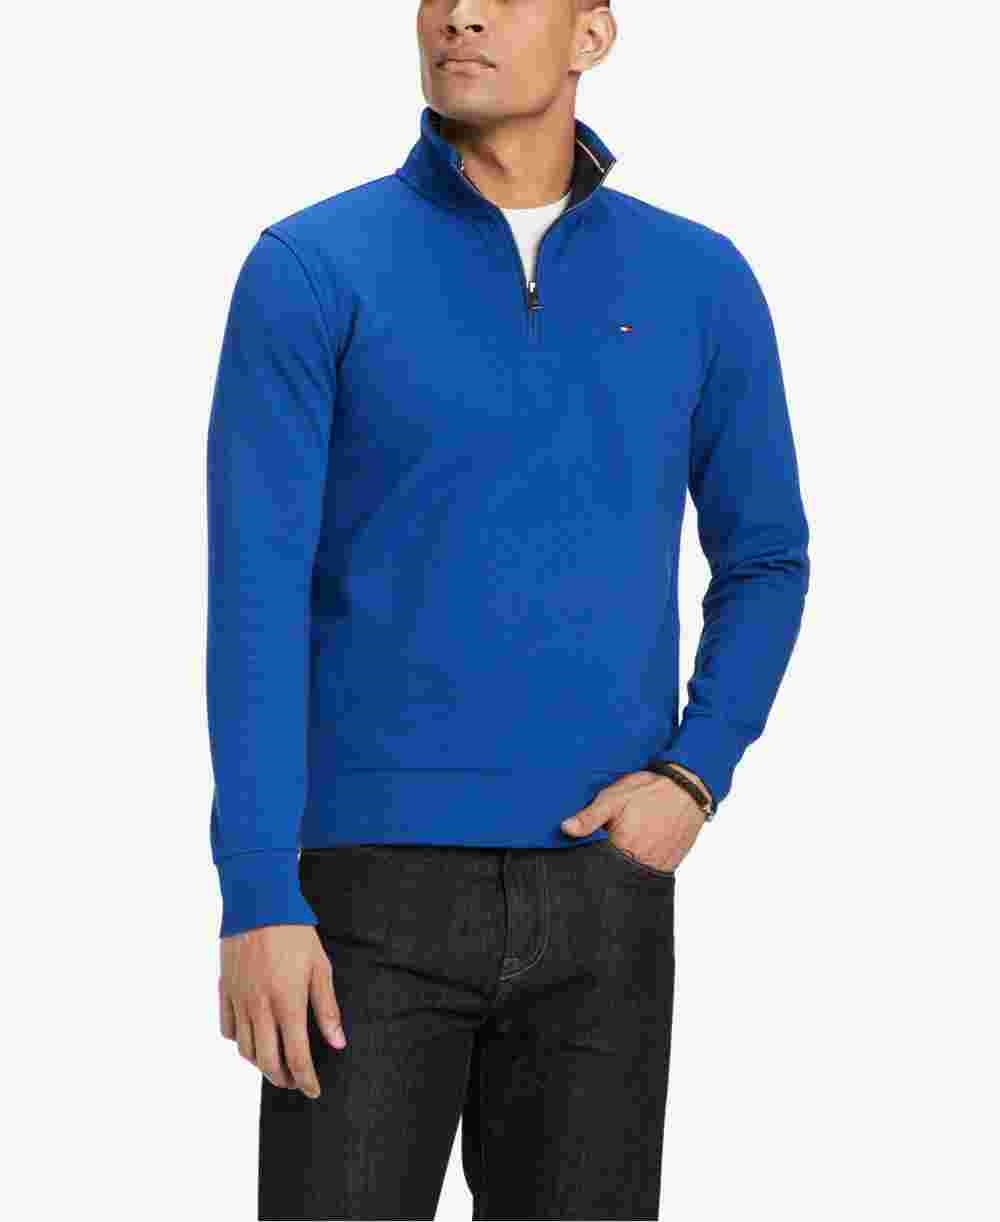 Tommy Hilfiger Men's Quarter-Zip Sweater  Bright Blue Size Small